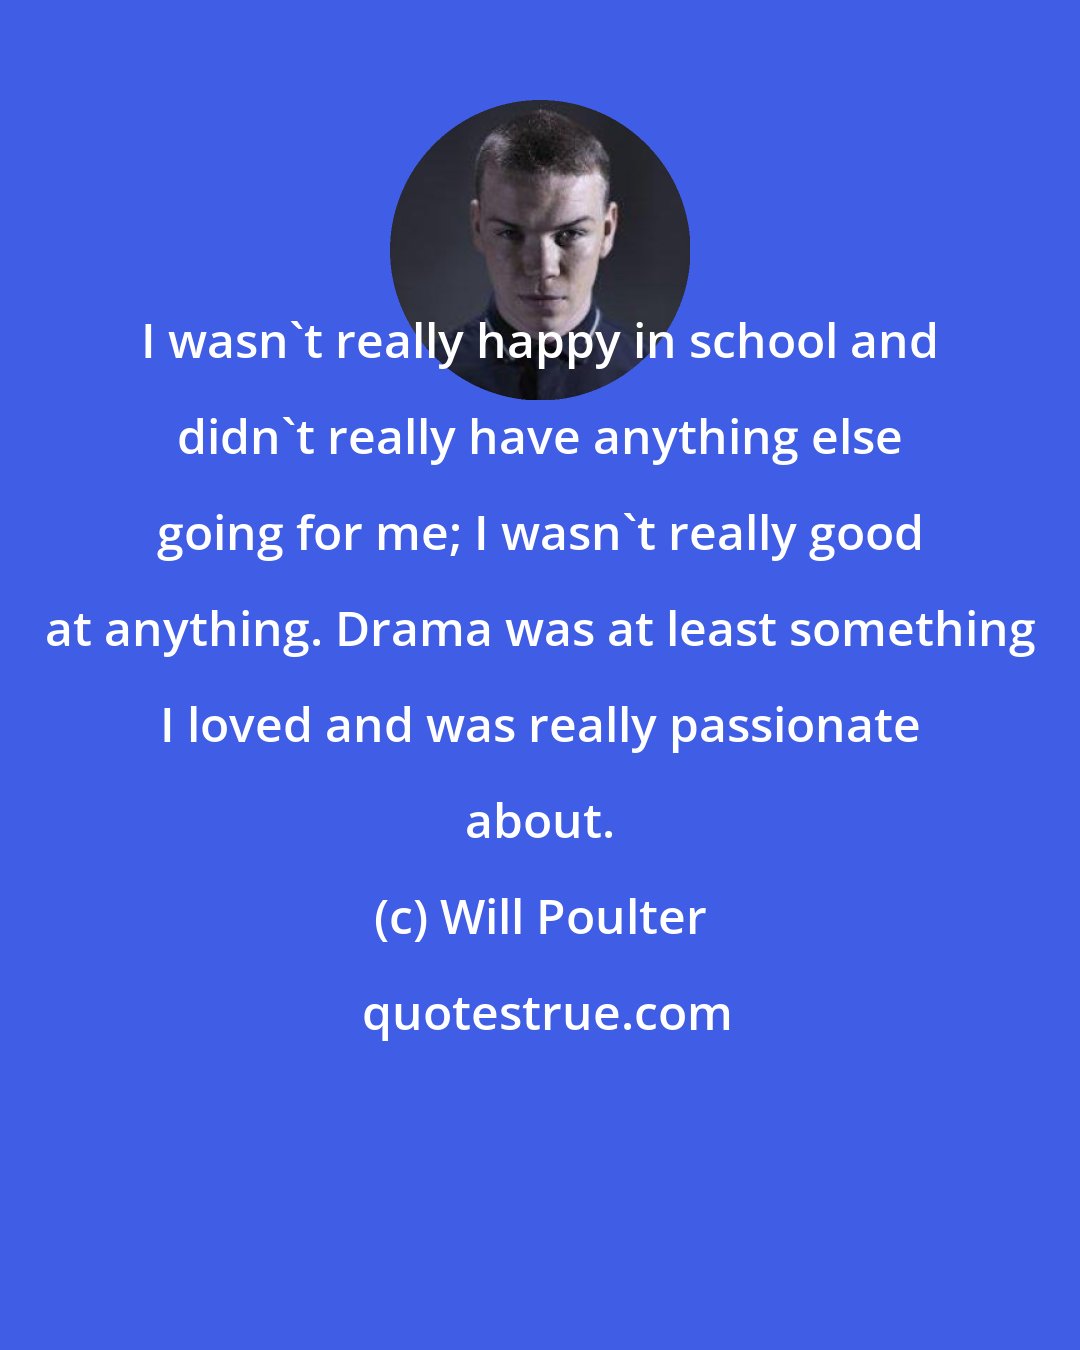 Will Poulter: I wasn't really happy in school and didn't really have anything else going for me; I wasn't really good at anything. Drama was at least something I loved and was really passionate about.